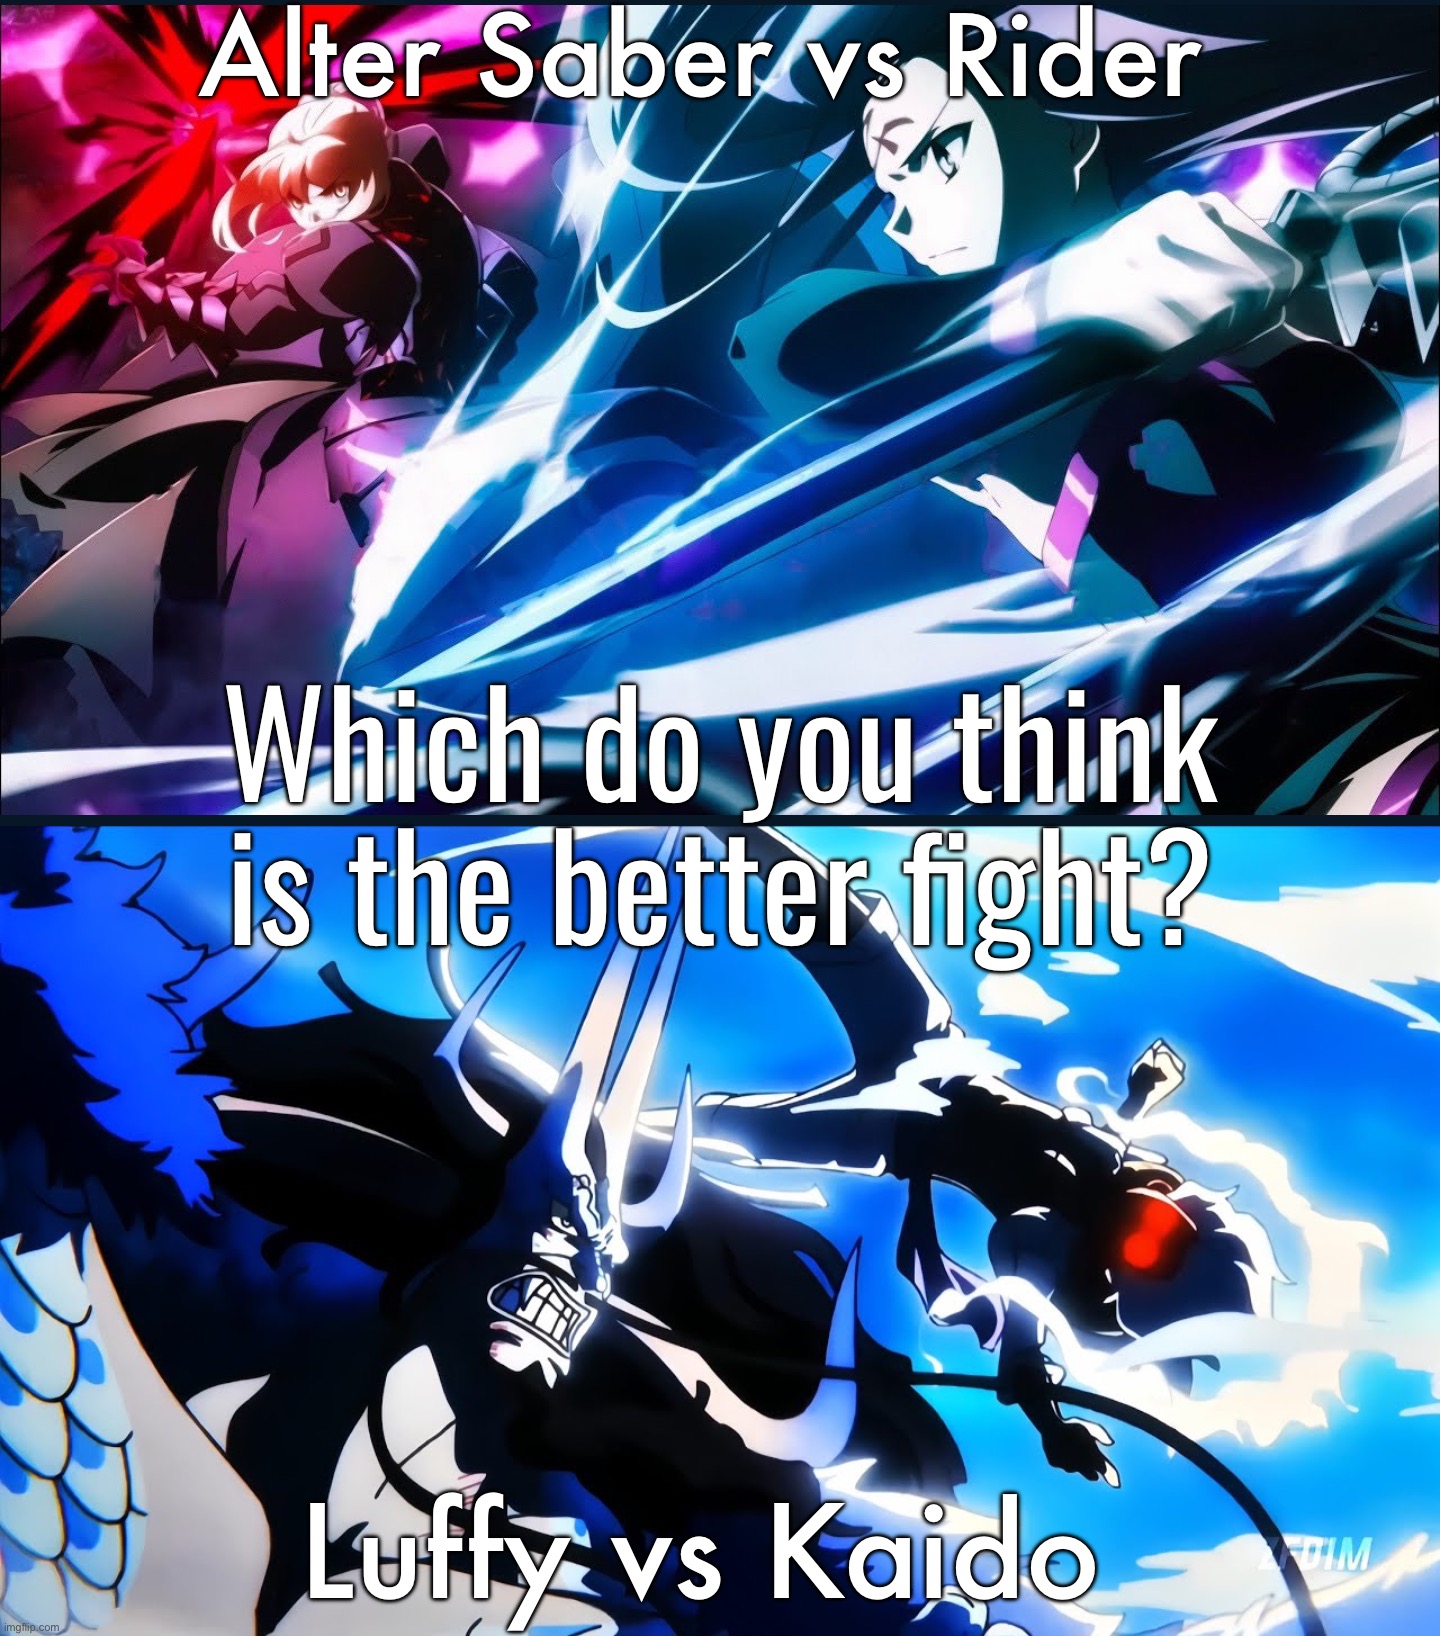 Alter Saber vs Rider; Which do you think is the better fight? Luffy vs Kaido | made w/ Imgflip meme maker